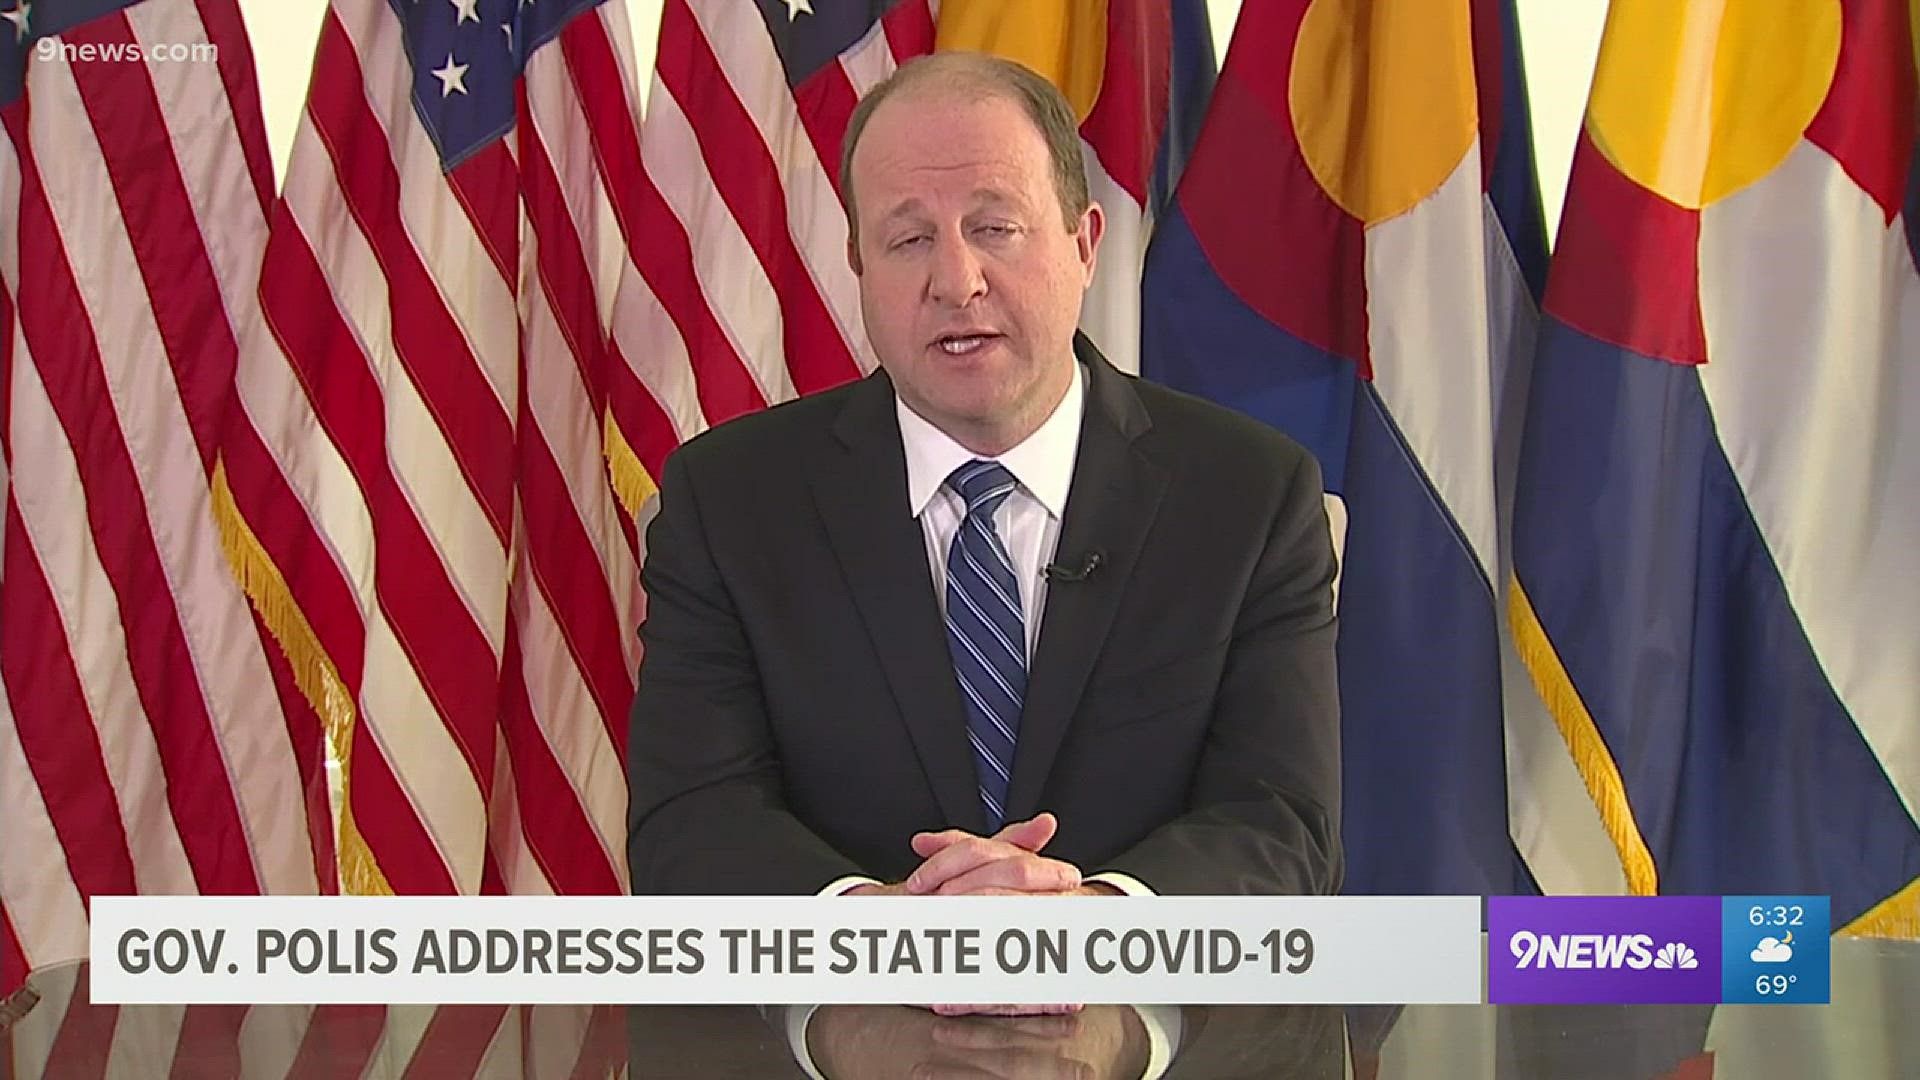 Gov. Jared Polis (D-Colorado) in a rare televised address Monday evening announced the extension of the statewide stay-at-home order from April 11 to April 26.